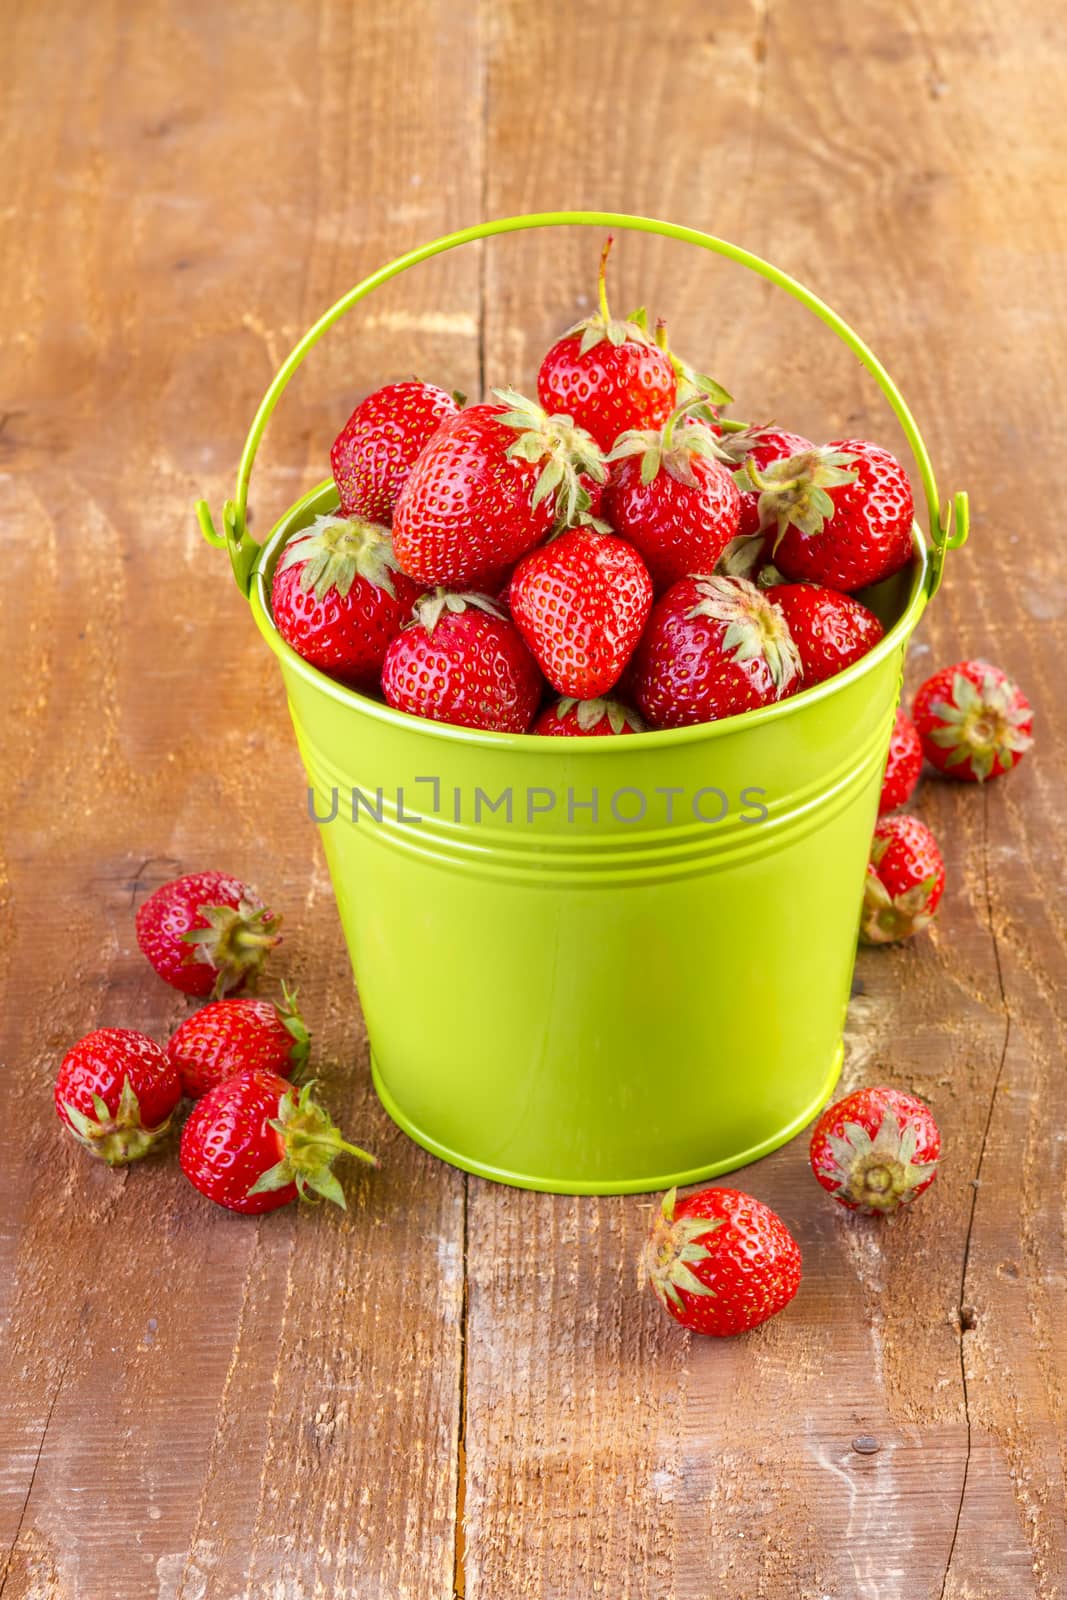 strawberry in a green metal bucket on wooden  by manaemedia